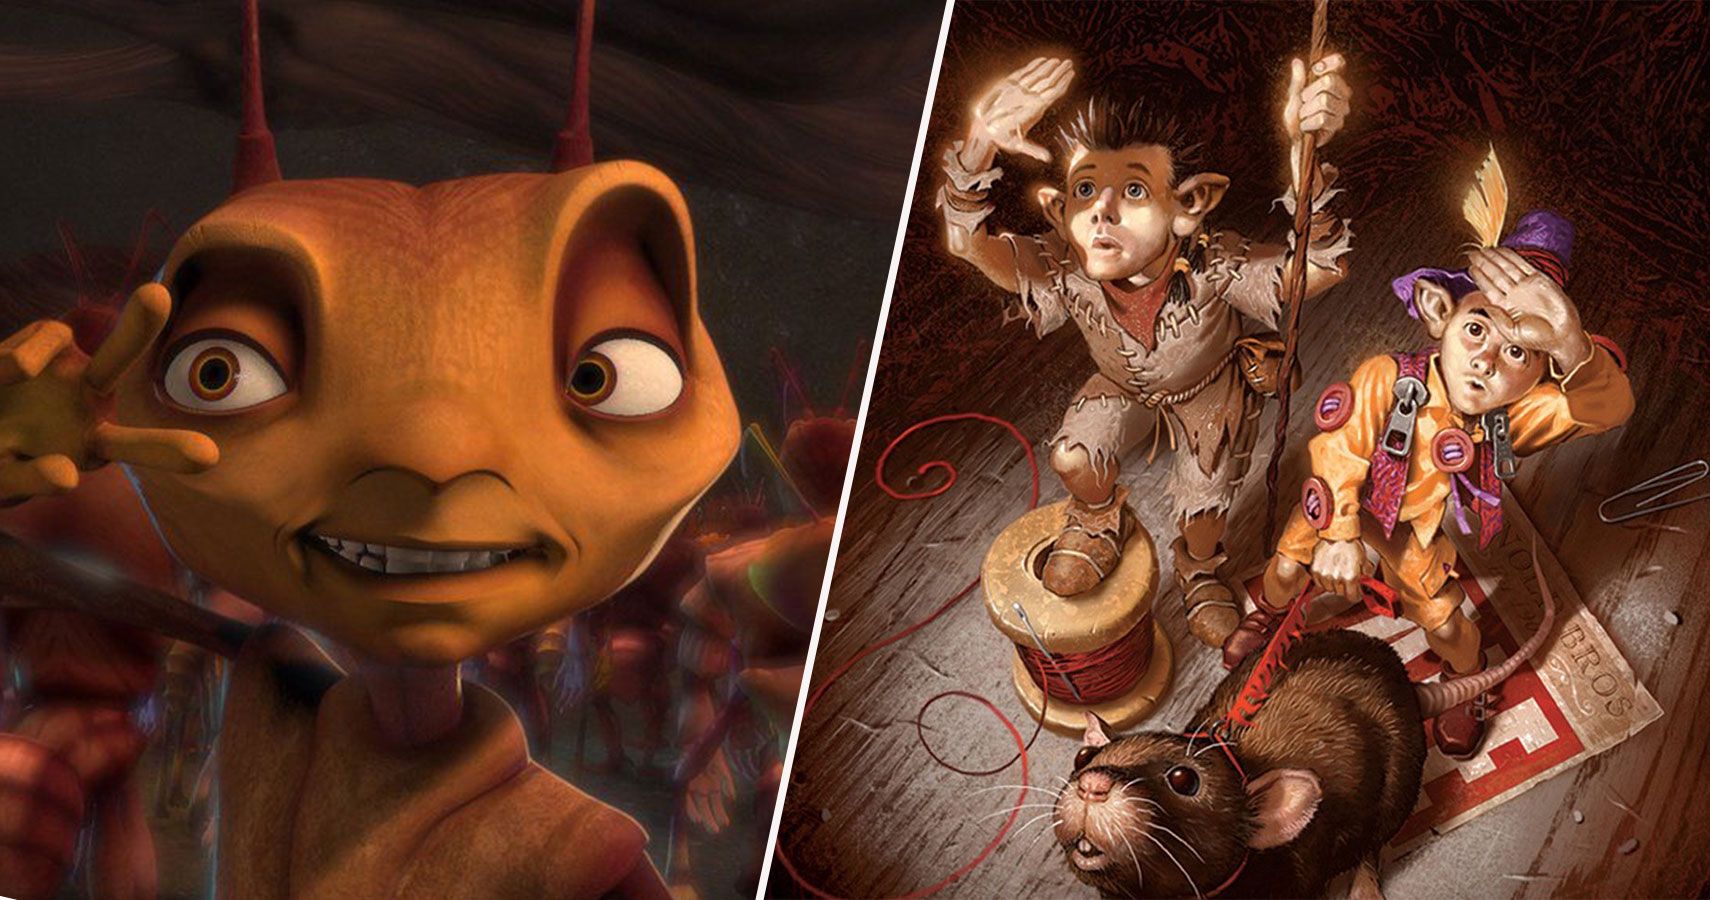 15 DreamWorks Animated Films We Wish Got Made (And 5 We're Glad Didn't)